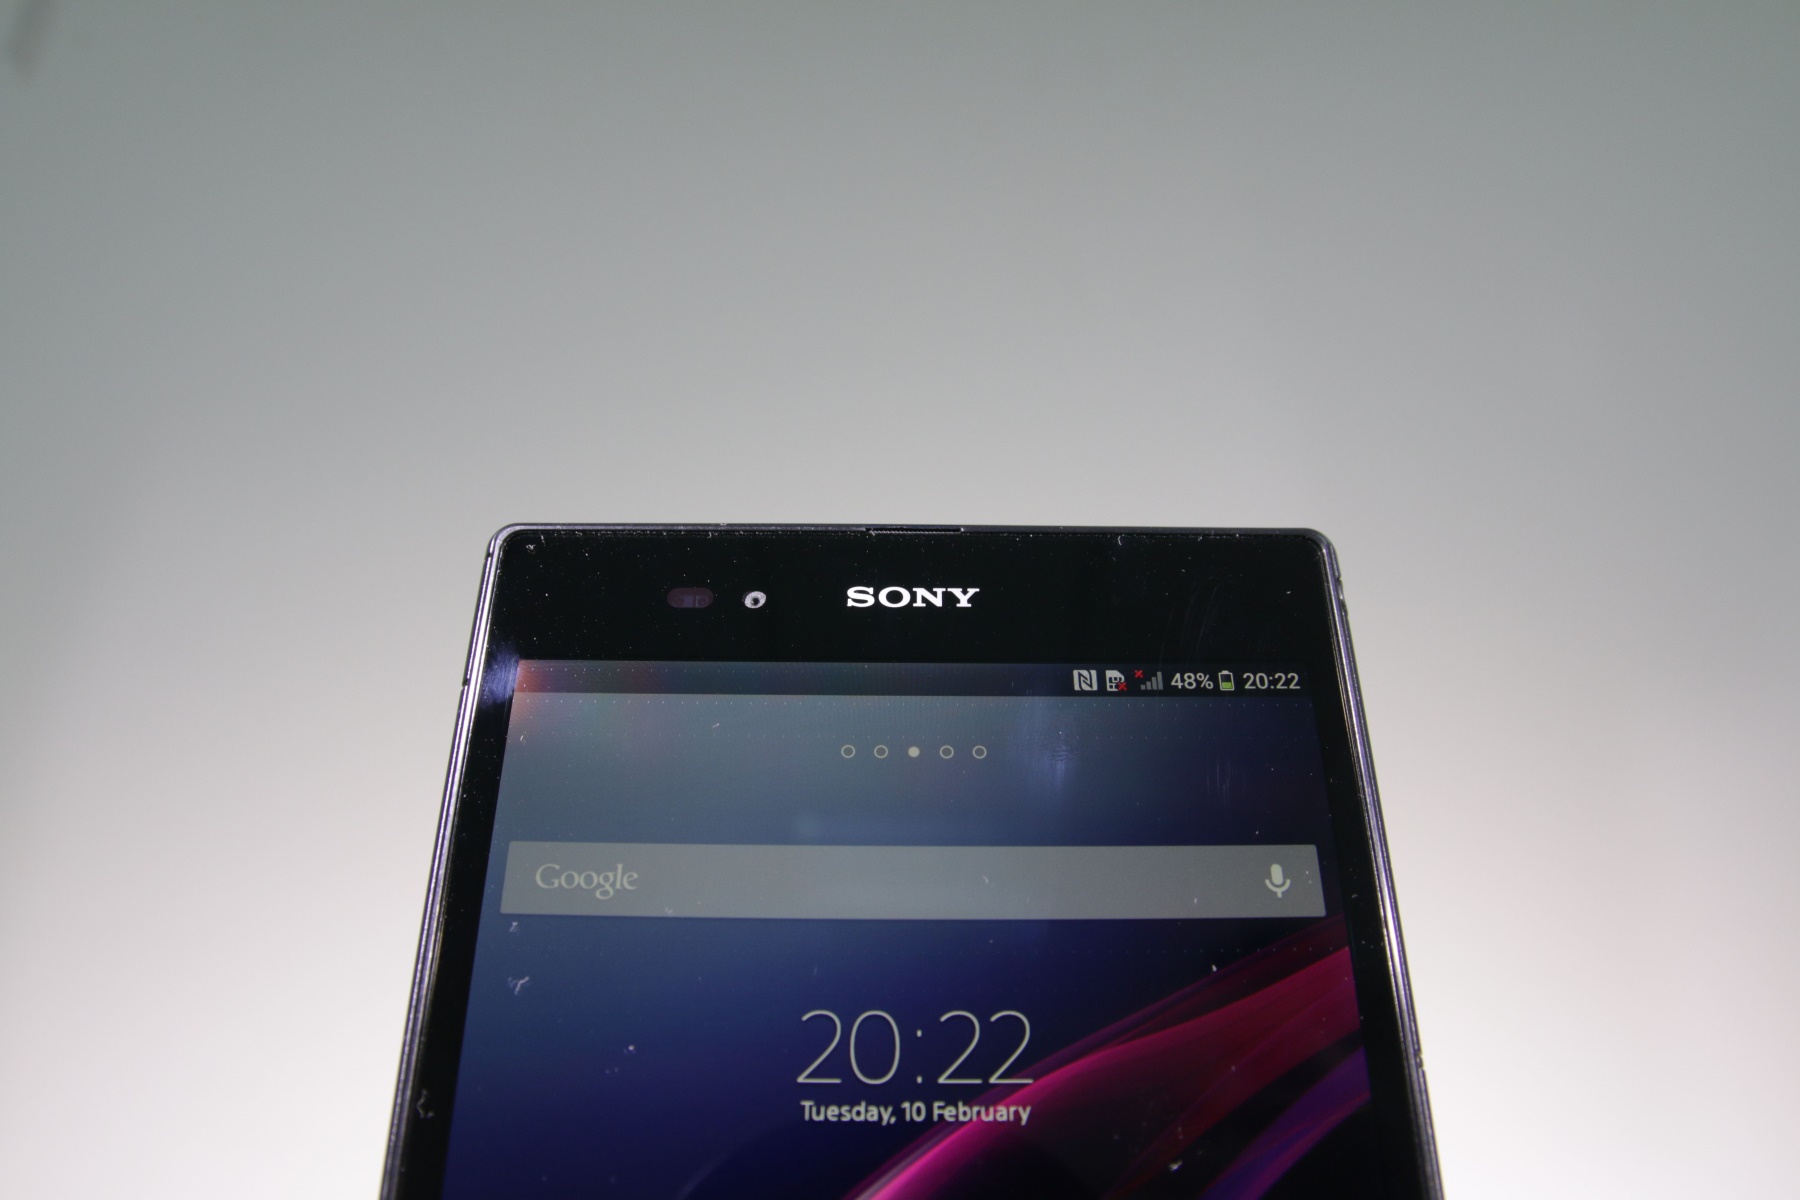 xperia-z-ultra-rooting-a-step-by-step-guide